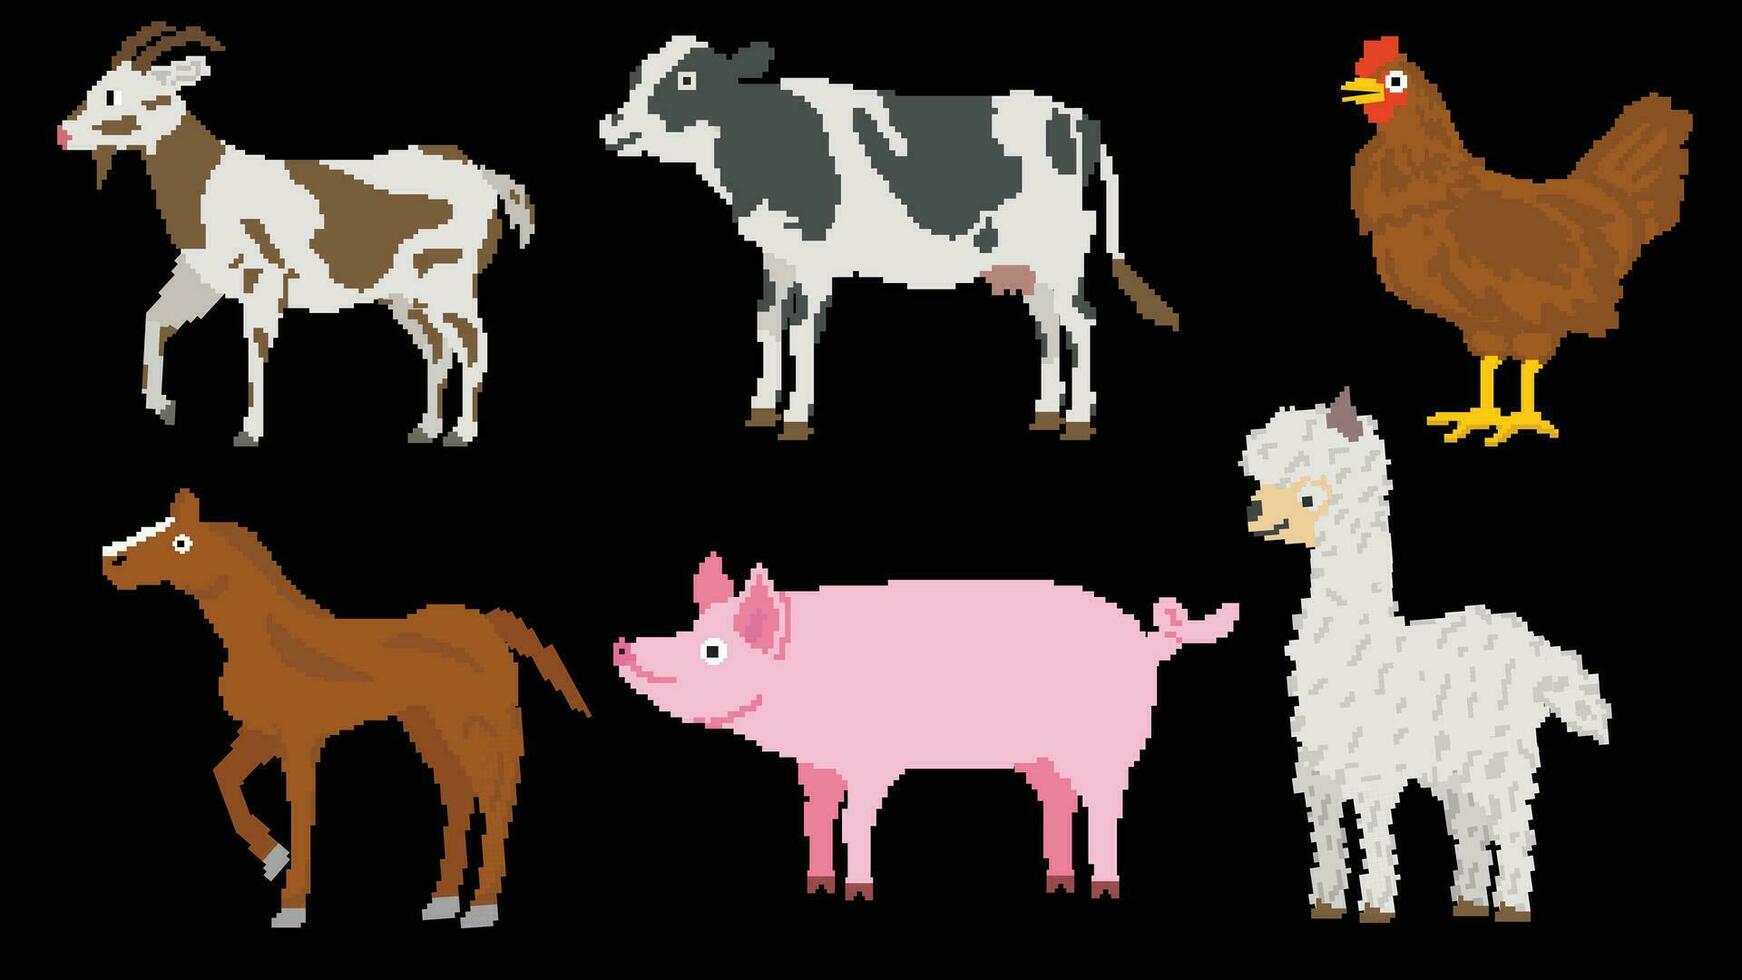 Farm animals designed based on 8 bit size. Suitable for your game assets, Goat, Cow, Chicken, Alpaca, Pig and Horse vector